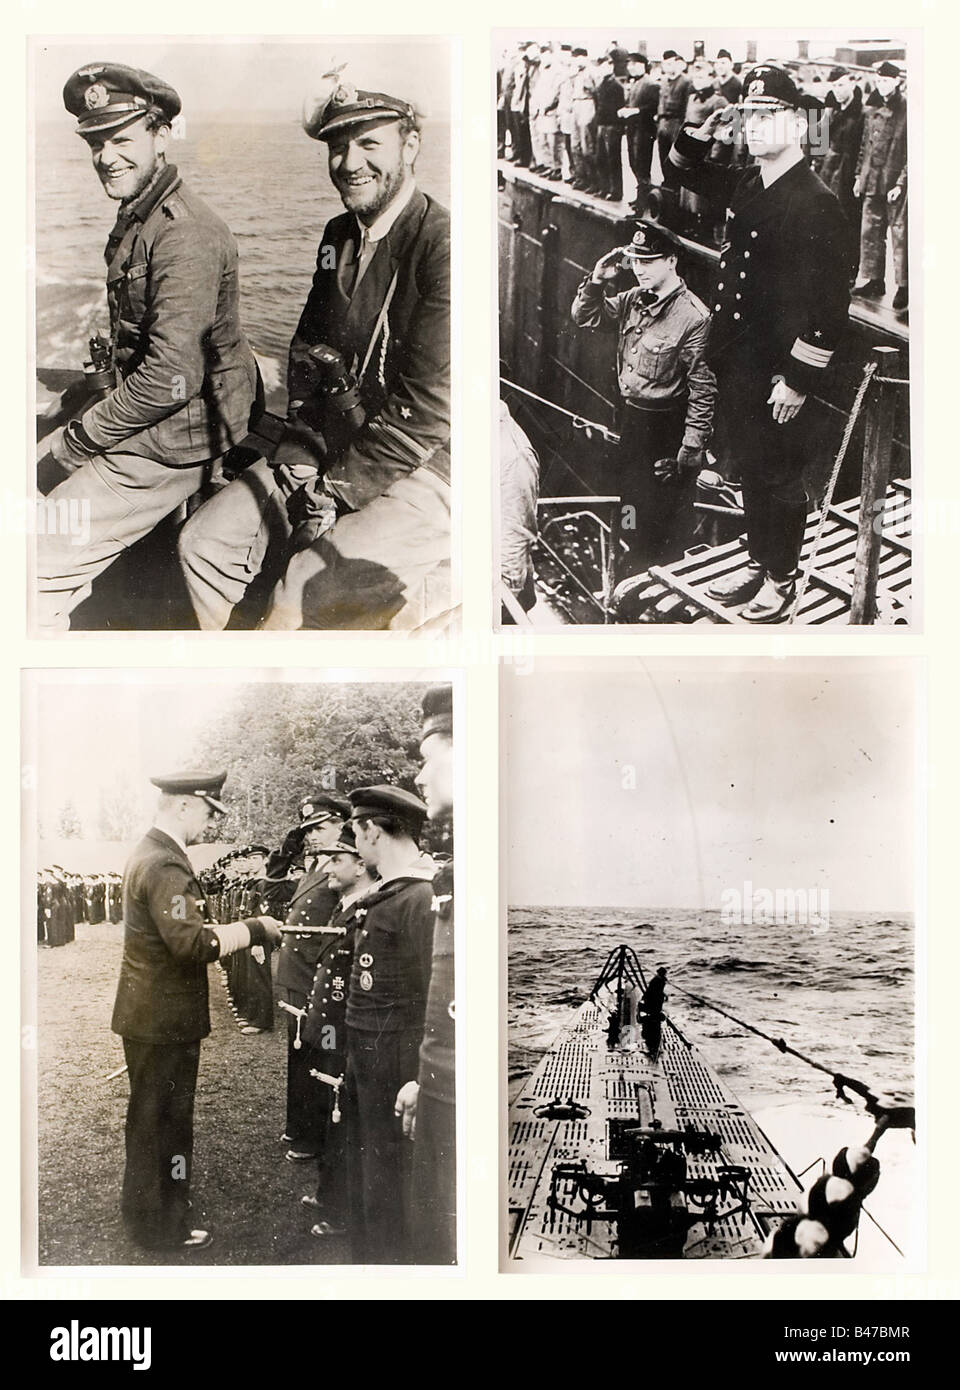 50 photographs - Submarines, period of the Second World War Very interesting photos of submarine units. 40 photographs of German submarines, ten photos of English, Italian and other submarines. Dönitz with his submariners, return home from a successful mission, drifting wreckage being picked up by a German submarine, etc. These come from the break up of a contemporary photo archive. Almost all photographs are inscribed in detail. Mostly unpublished. historic, historical, people, 1930s, 20th century, Wehrmacht, armed forces, army, NS, National Socialism, Nazism,, Stock Photo